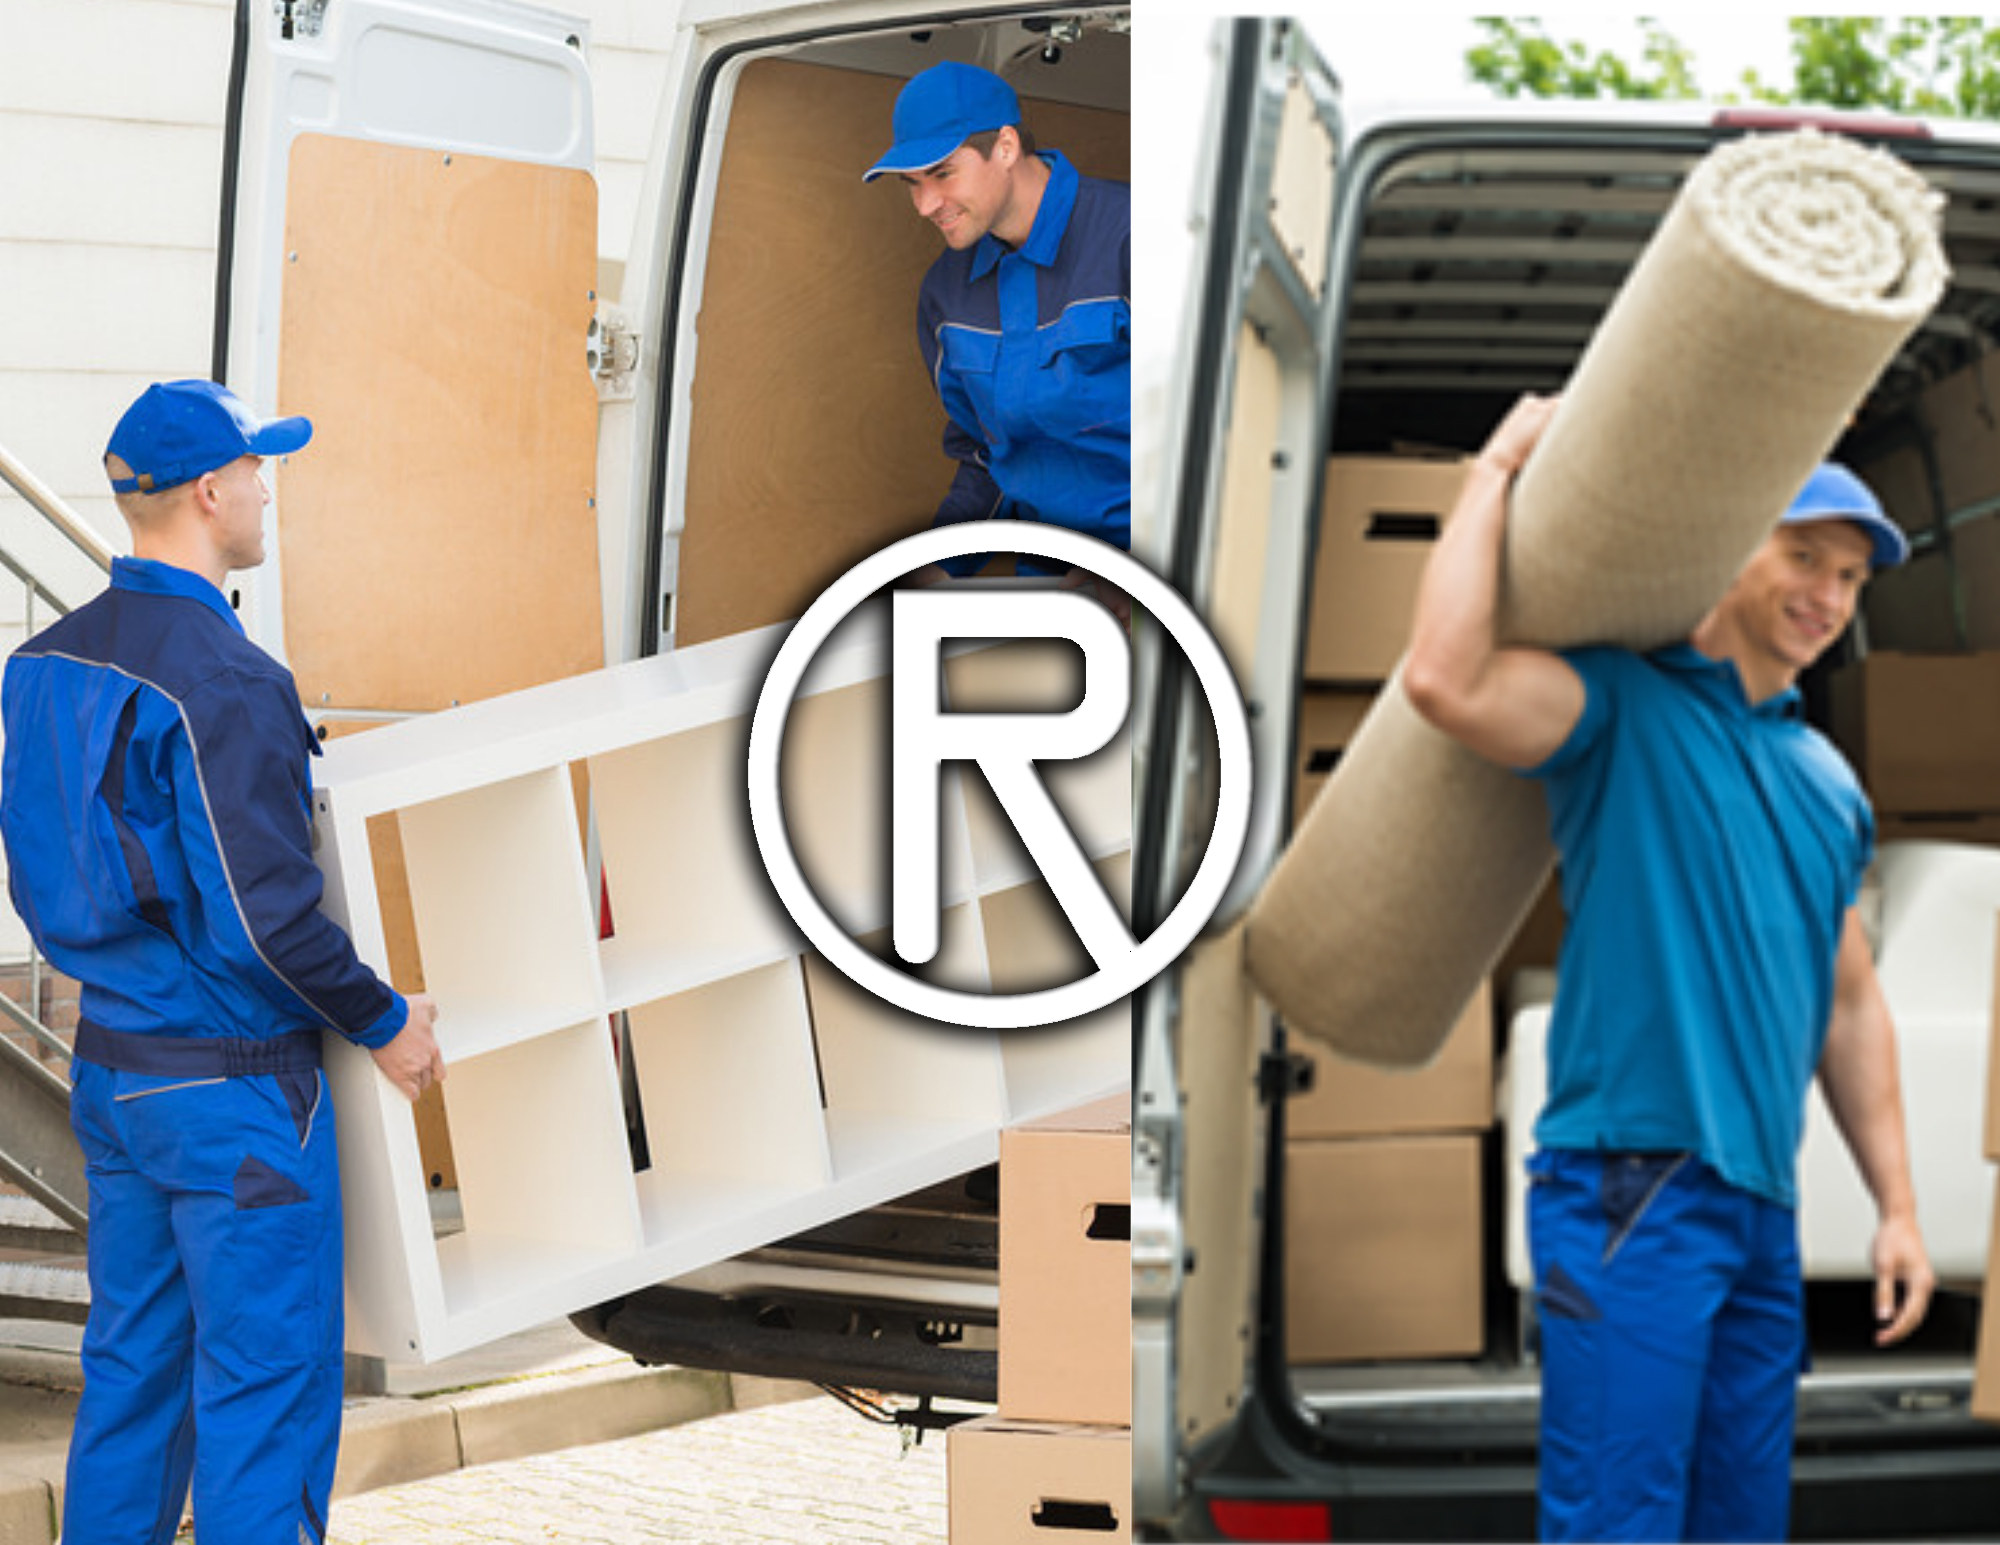 Furniture Removalists